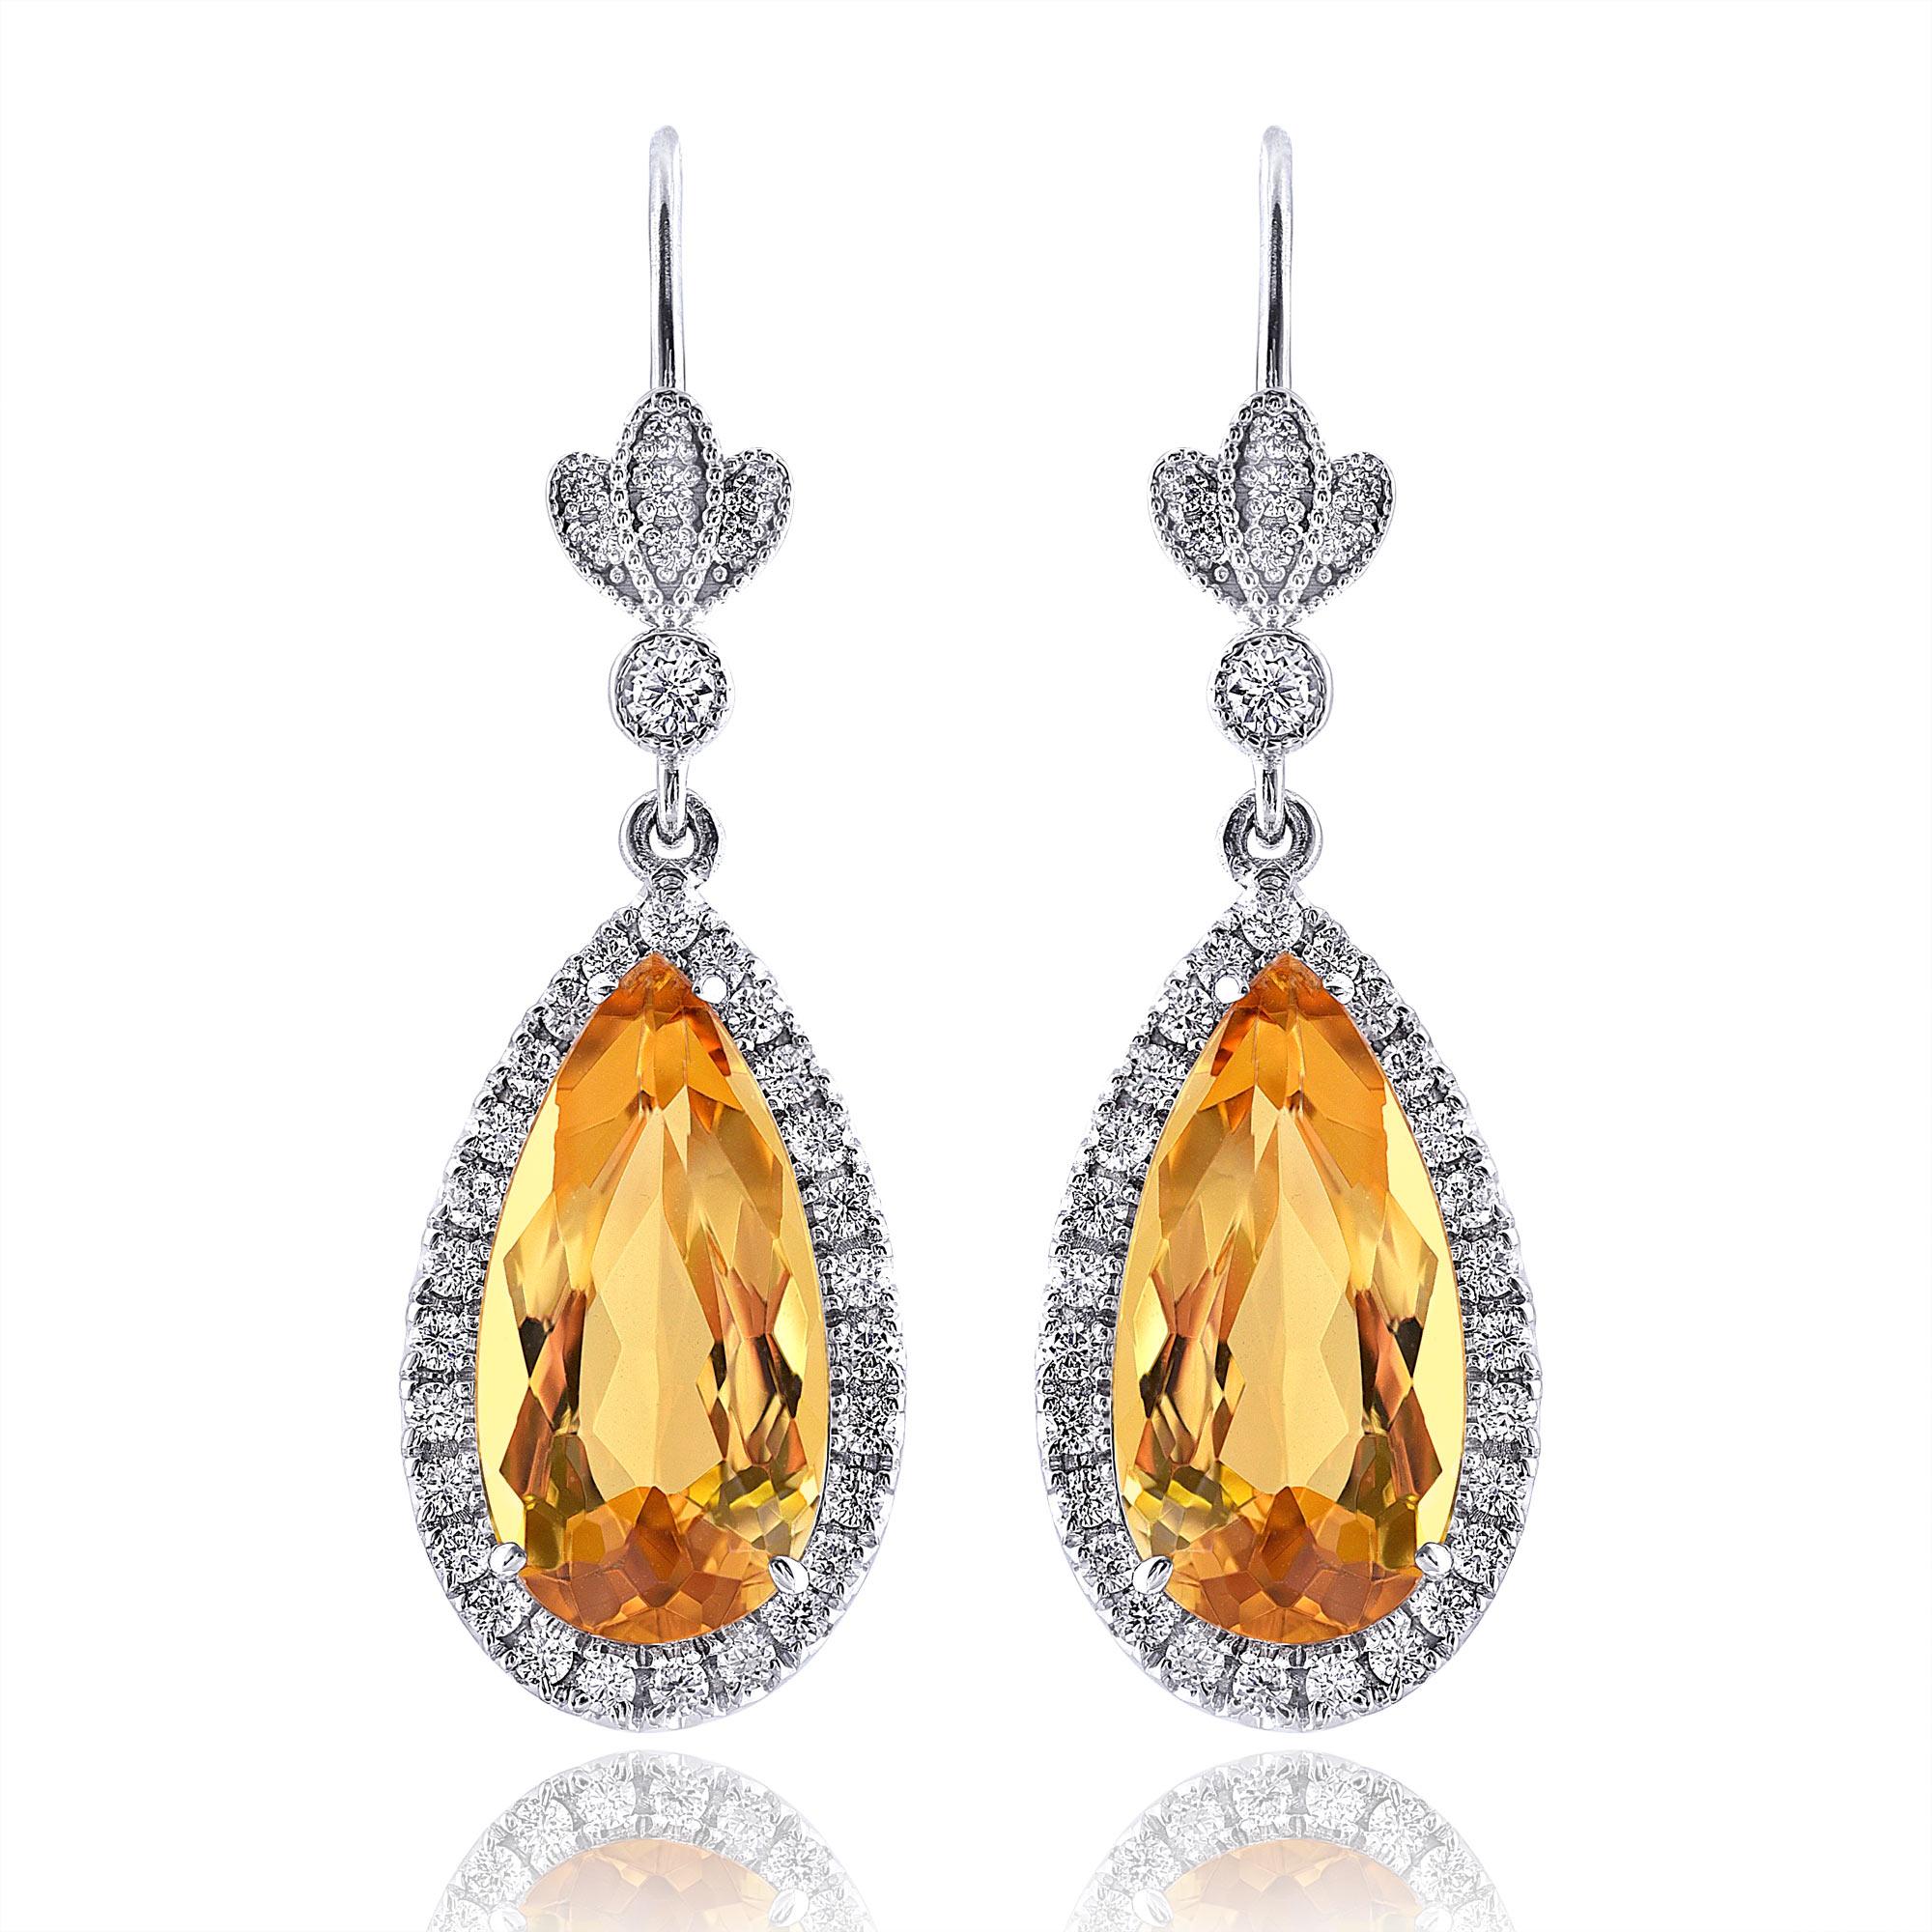 Bring the beauty of the sun with you by wearing these custom made 18K white gold dangle earrings, elegantly crafted in a rich shine. Elongated pear-shaped natural high-quality precious yellow topazes exhibit a warm orange-yellow hue, undeniably